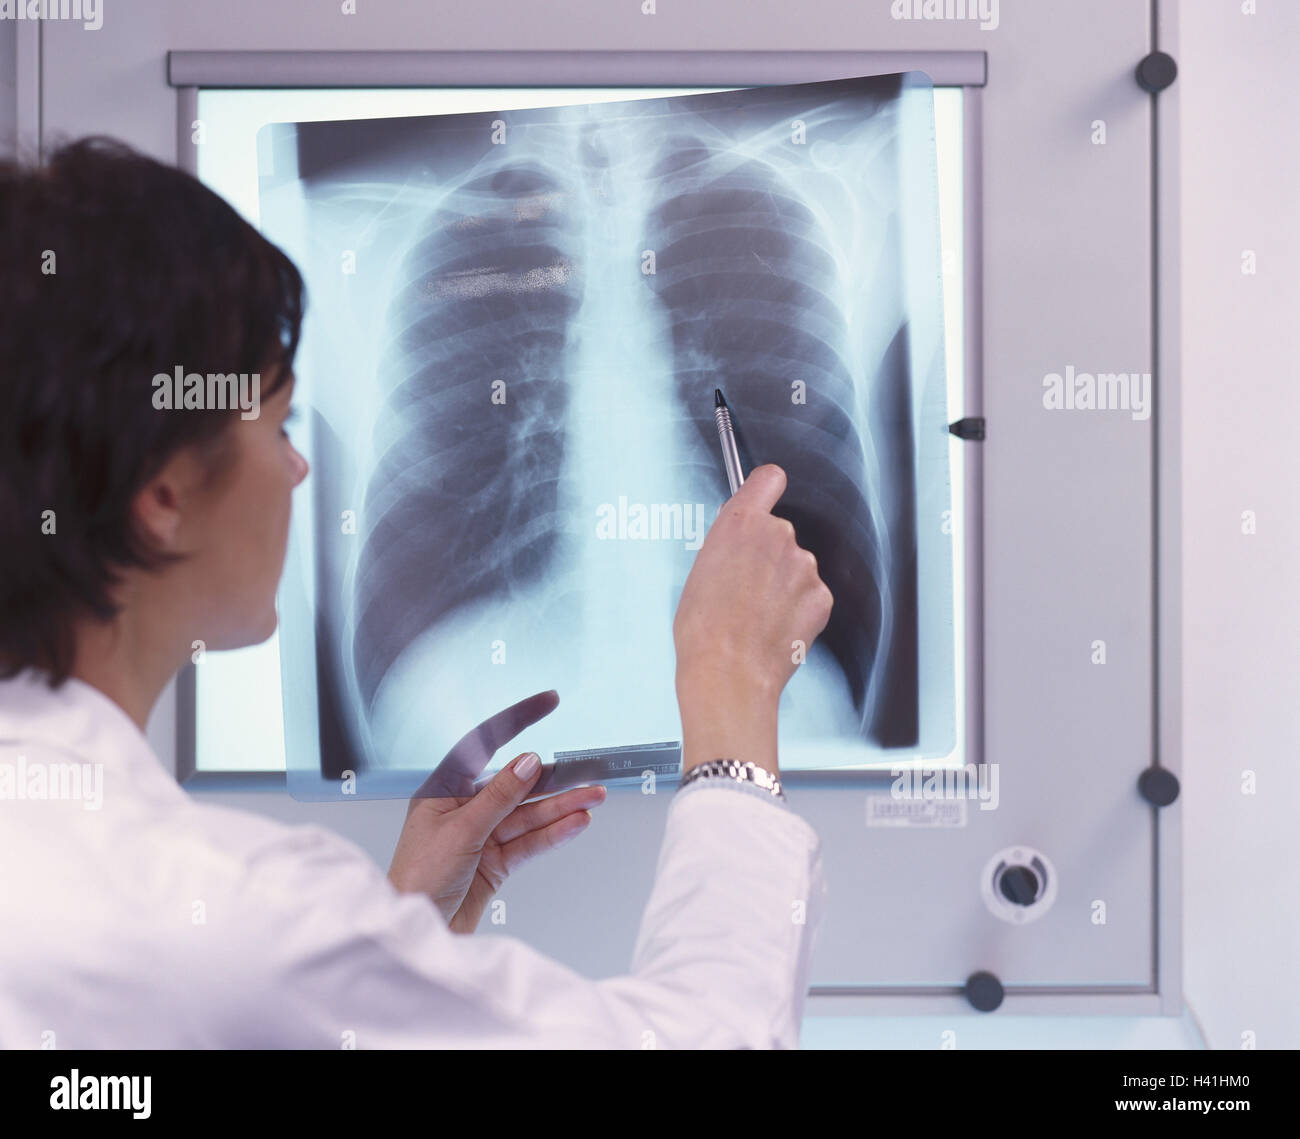 Doctor, luminous notice board, roentgenogram, diagnostic, side view, woman, 30 years, X-ray picture, specialist, doctor, medicine, findings, declare, explain, consult, indicate, precaution, controls, health, disease, occupation, remedial occupation, public health, curled Stock Photo